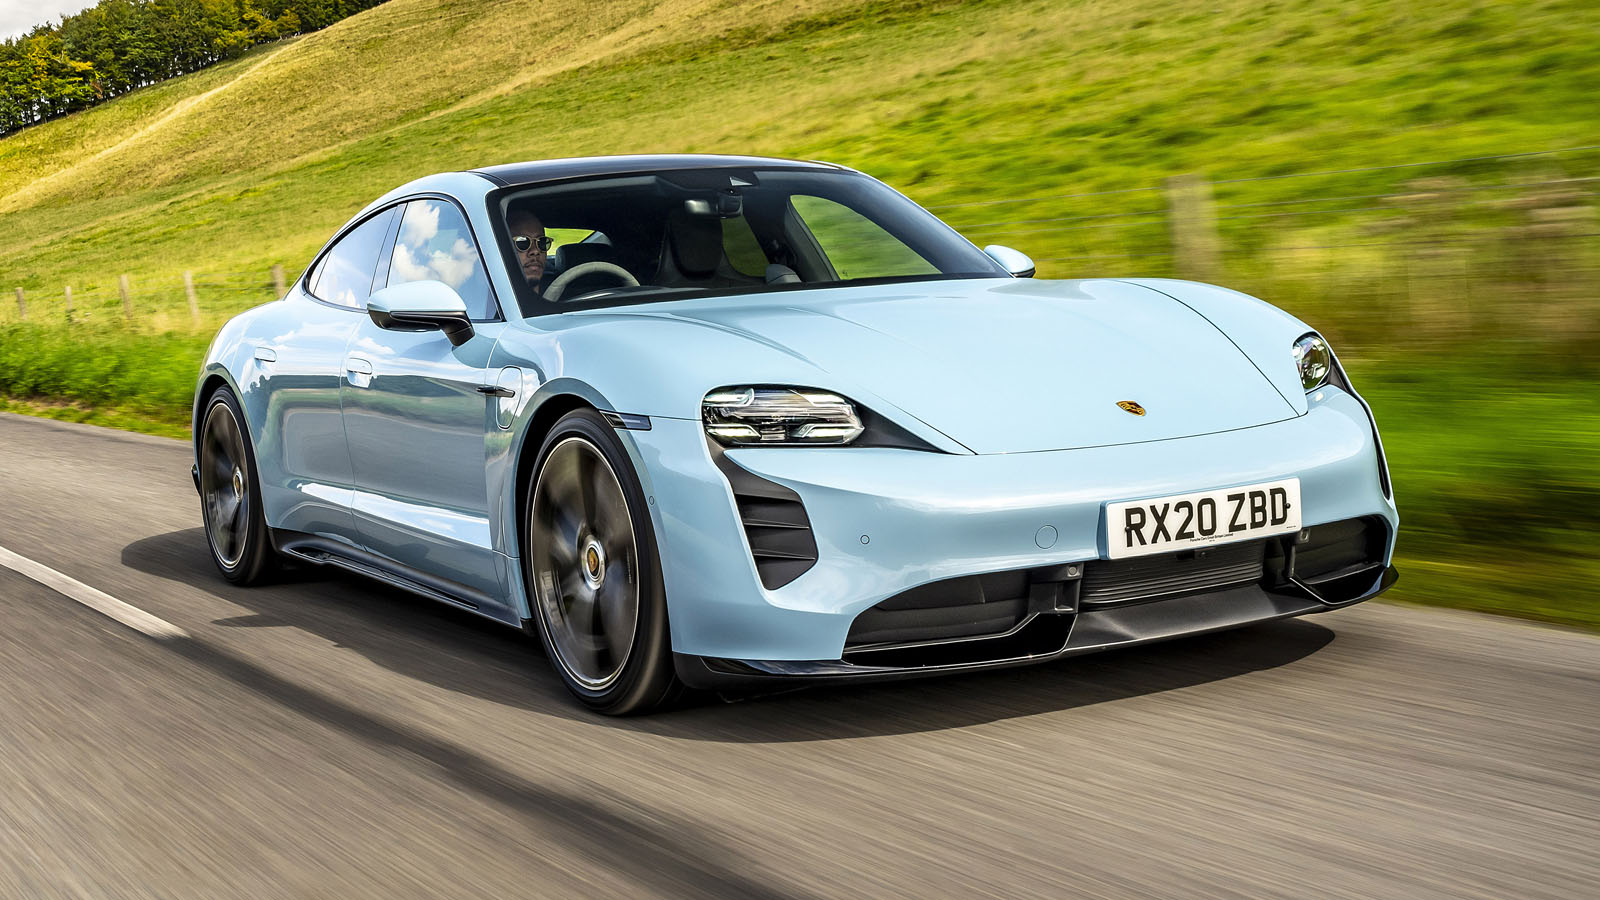 The Future of Performance: The Porsche Taycan EV